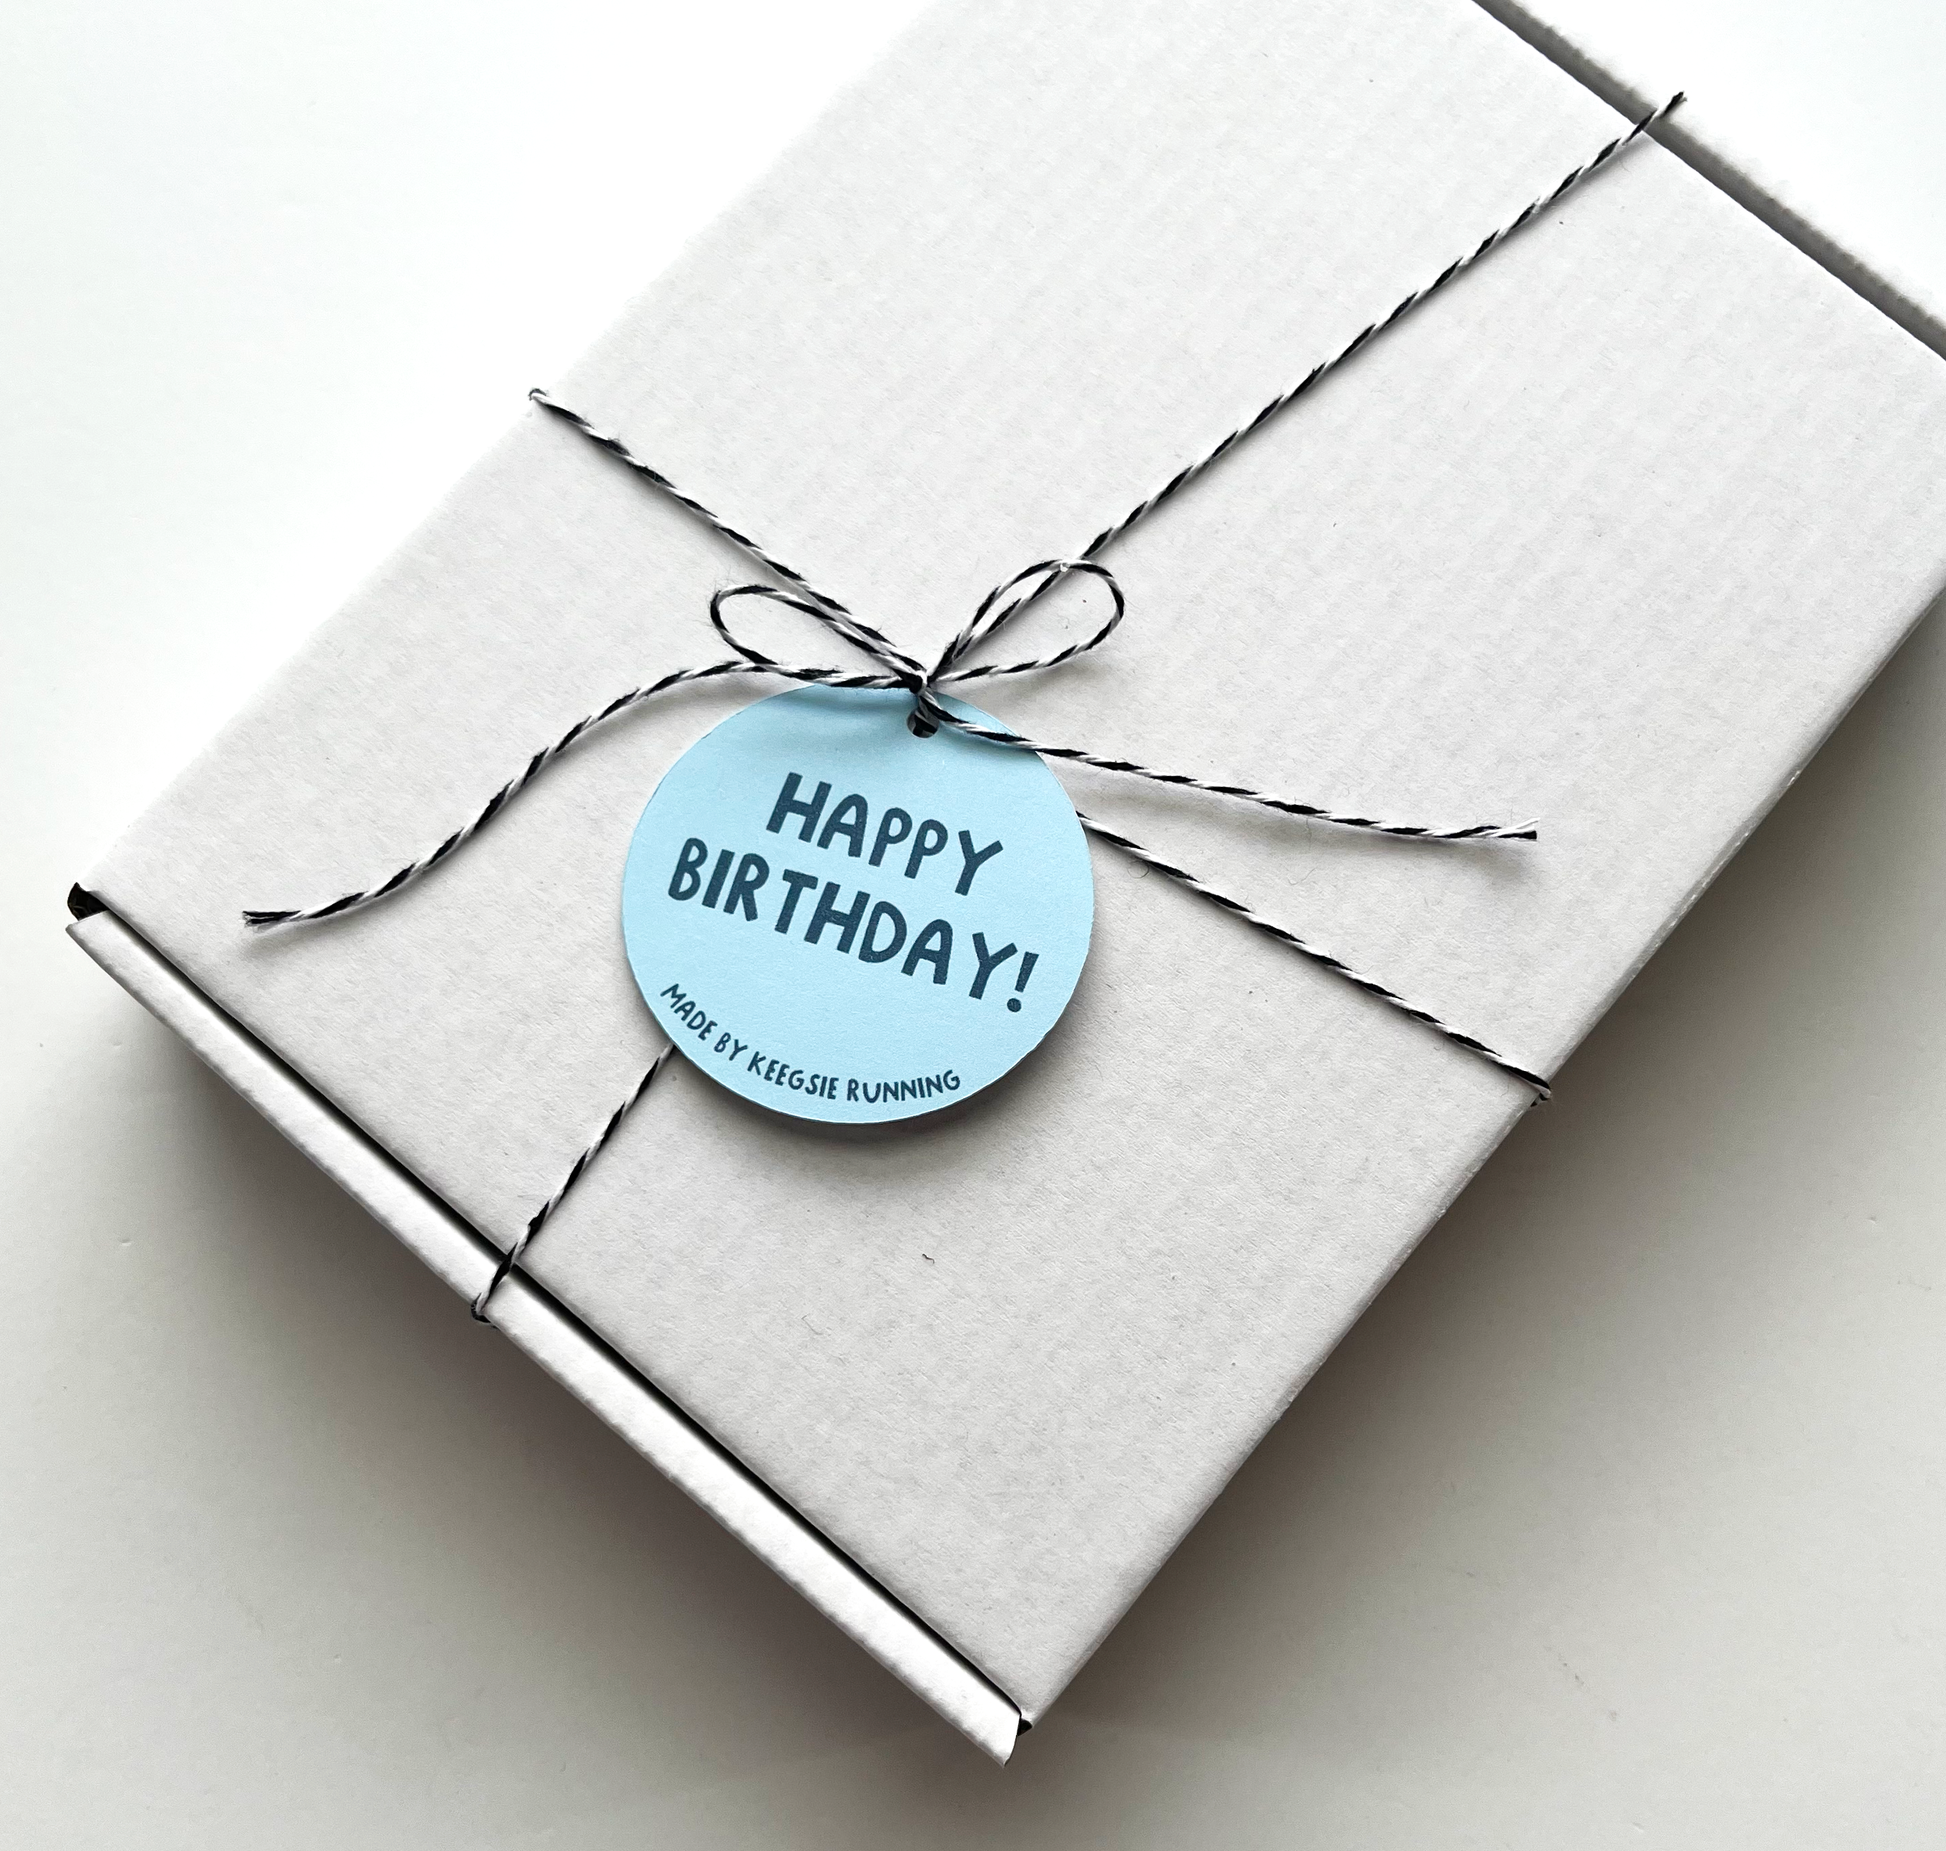 Runner birthday white gift box closed and tied with twin and tag that says "happy birthday! made by keegsie running"